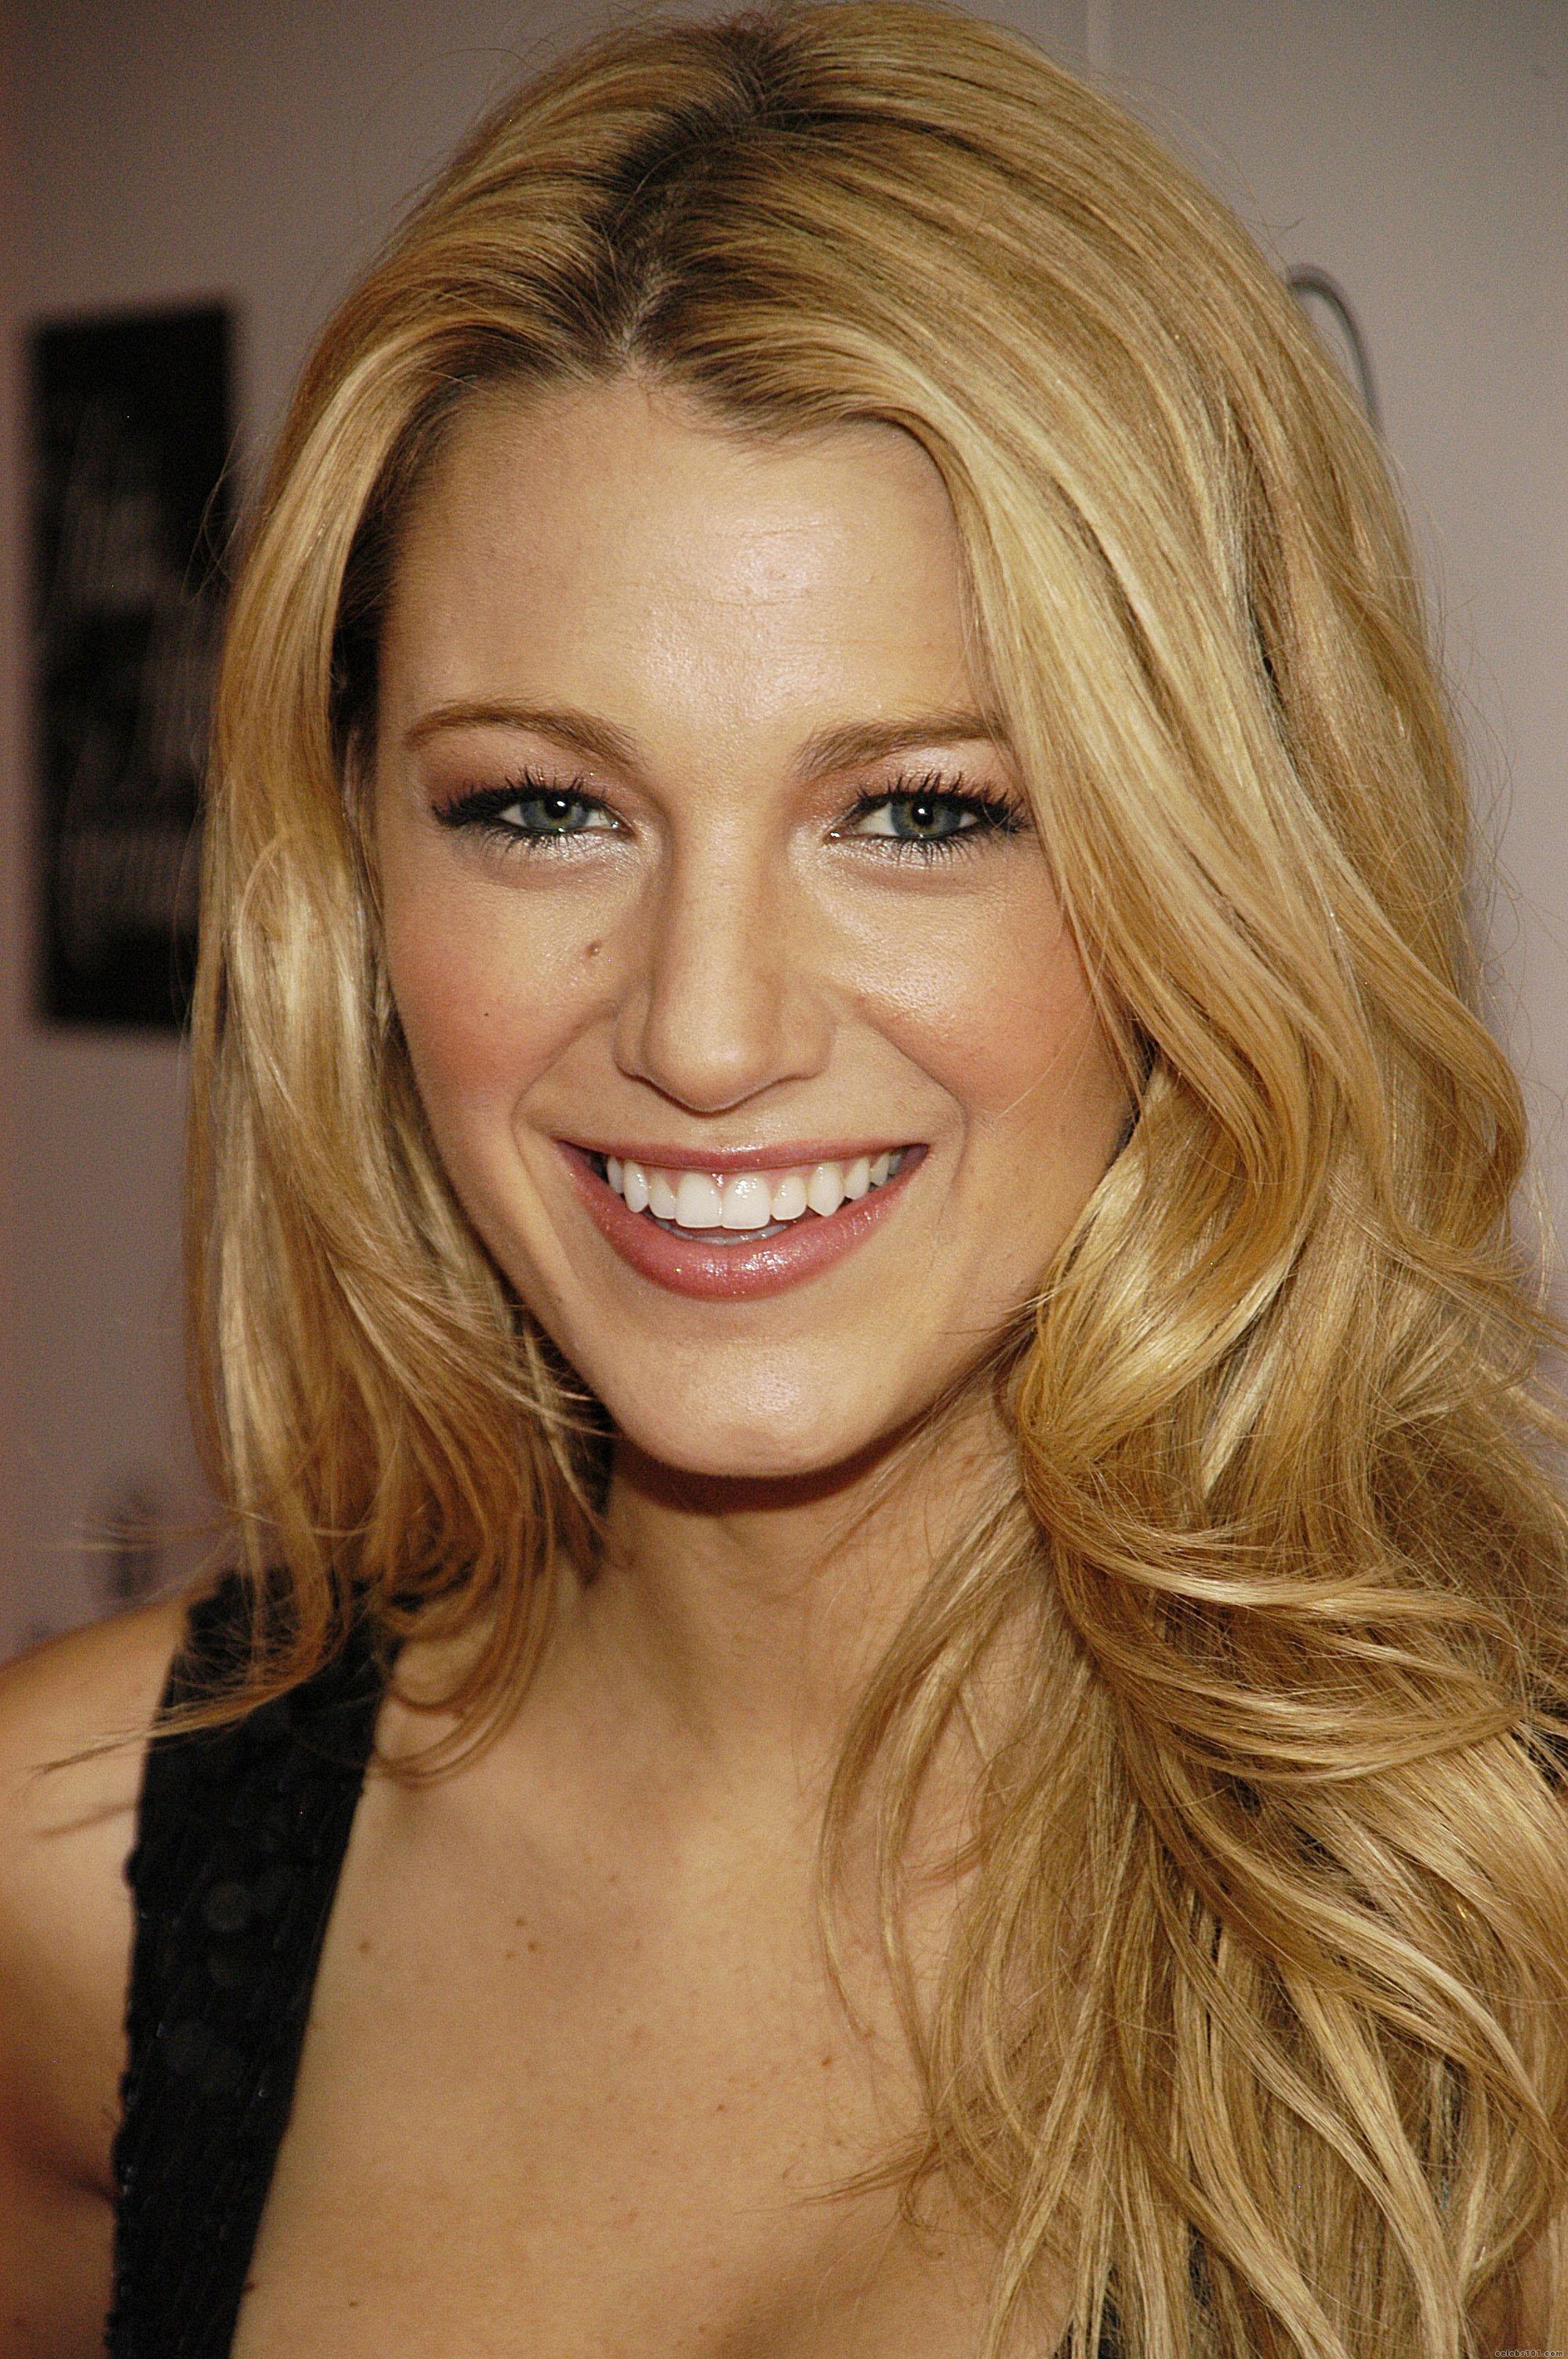 Blake Lively Wallpaper Image Photos Pictures Background